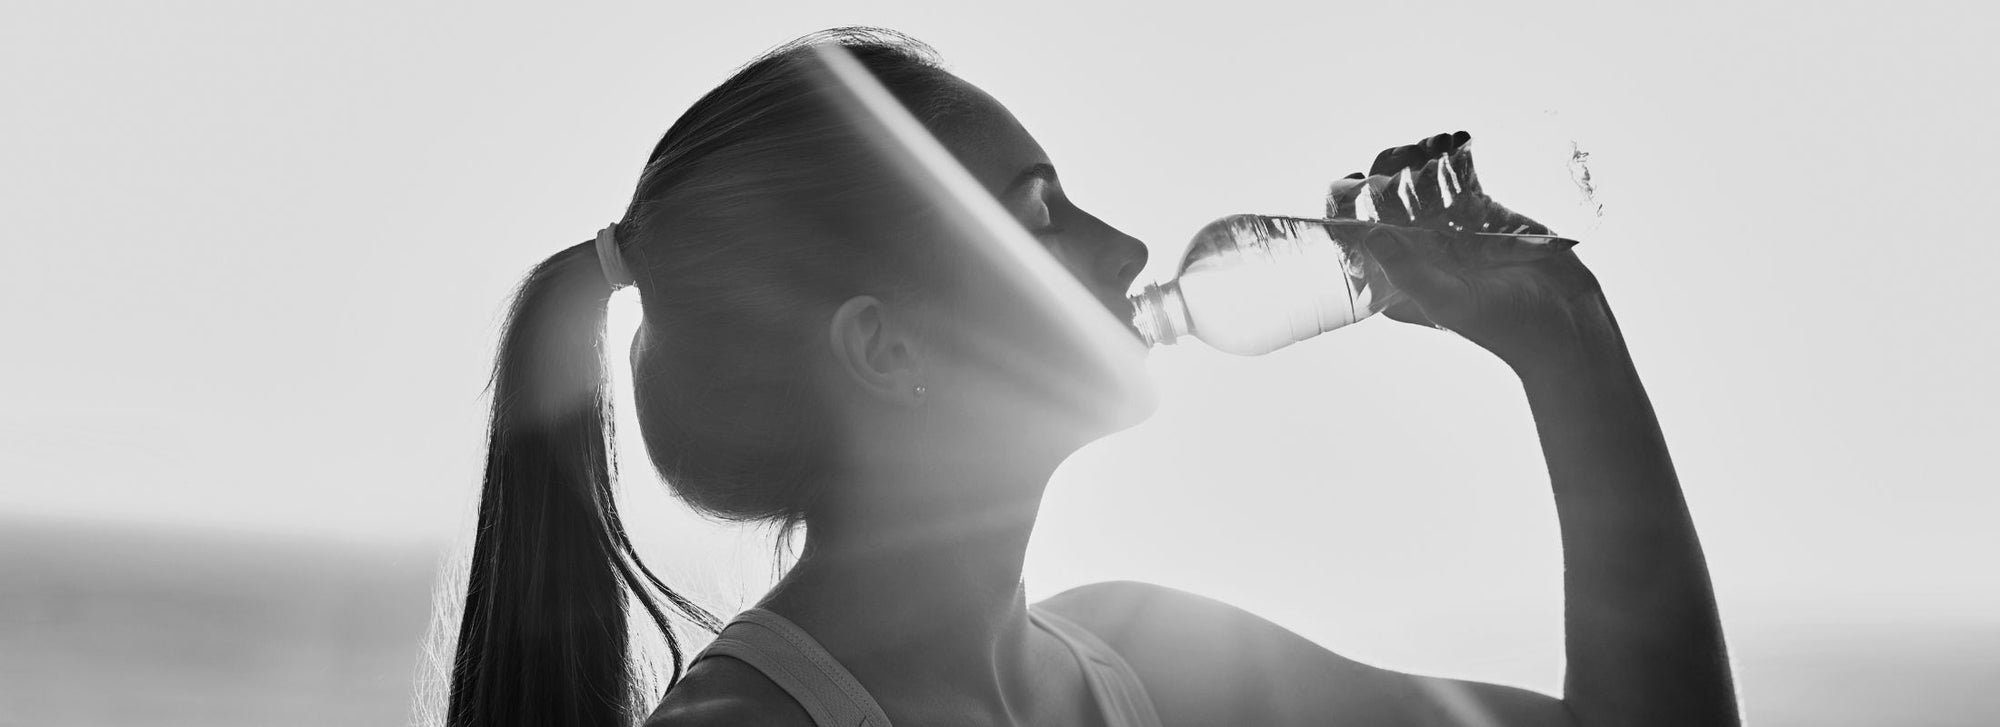 Achieve Peak Performance Through Optimal Hydration: Your Guide to Staying Hydrated